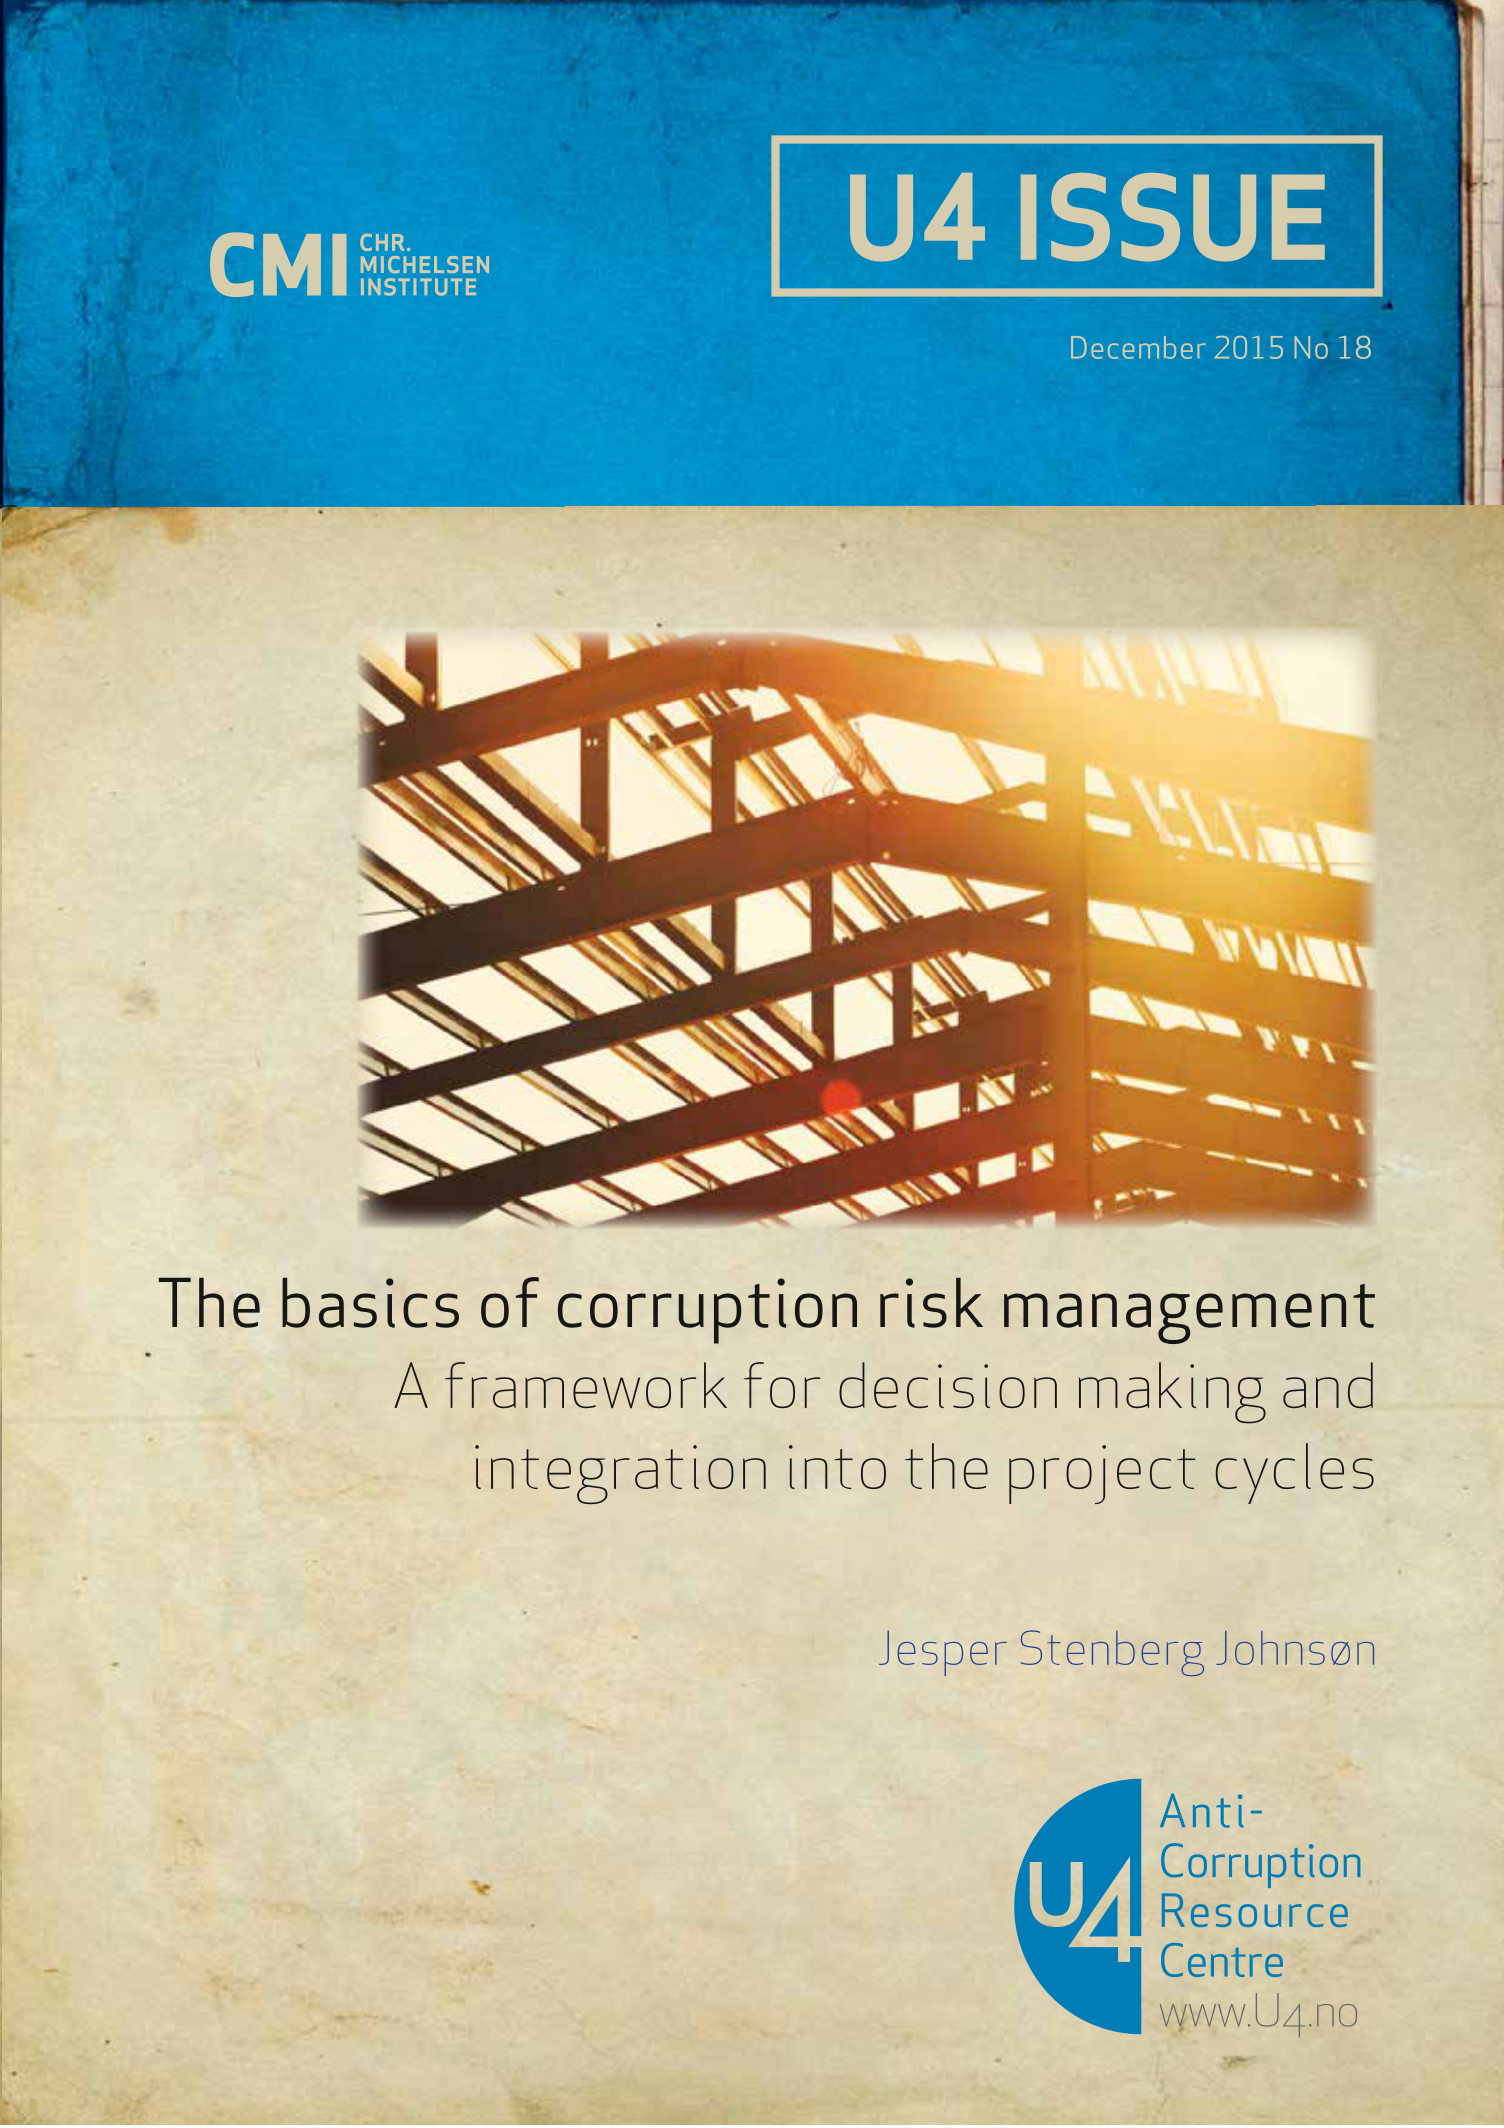 The basics of corruption risk management:  A framework for decision making and integration into the project cycles